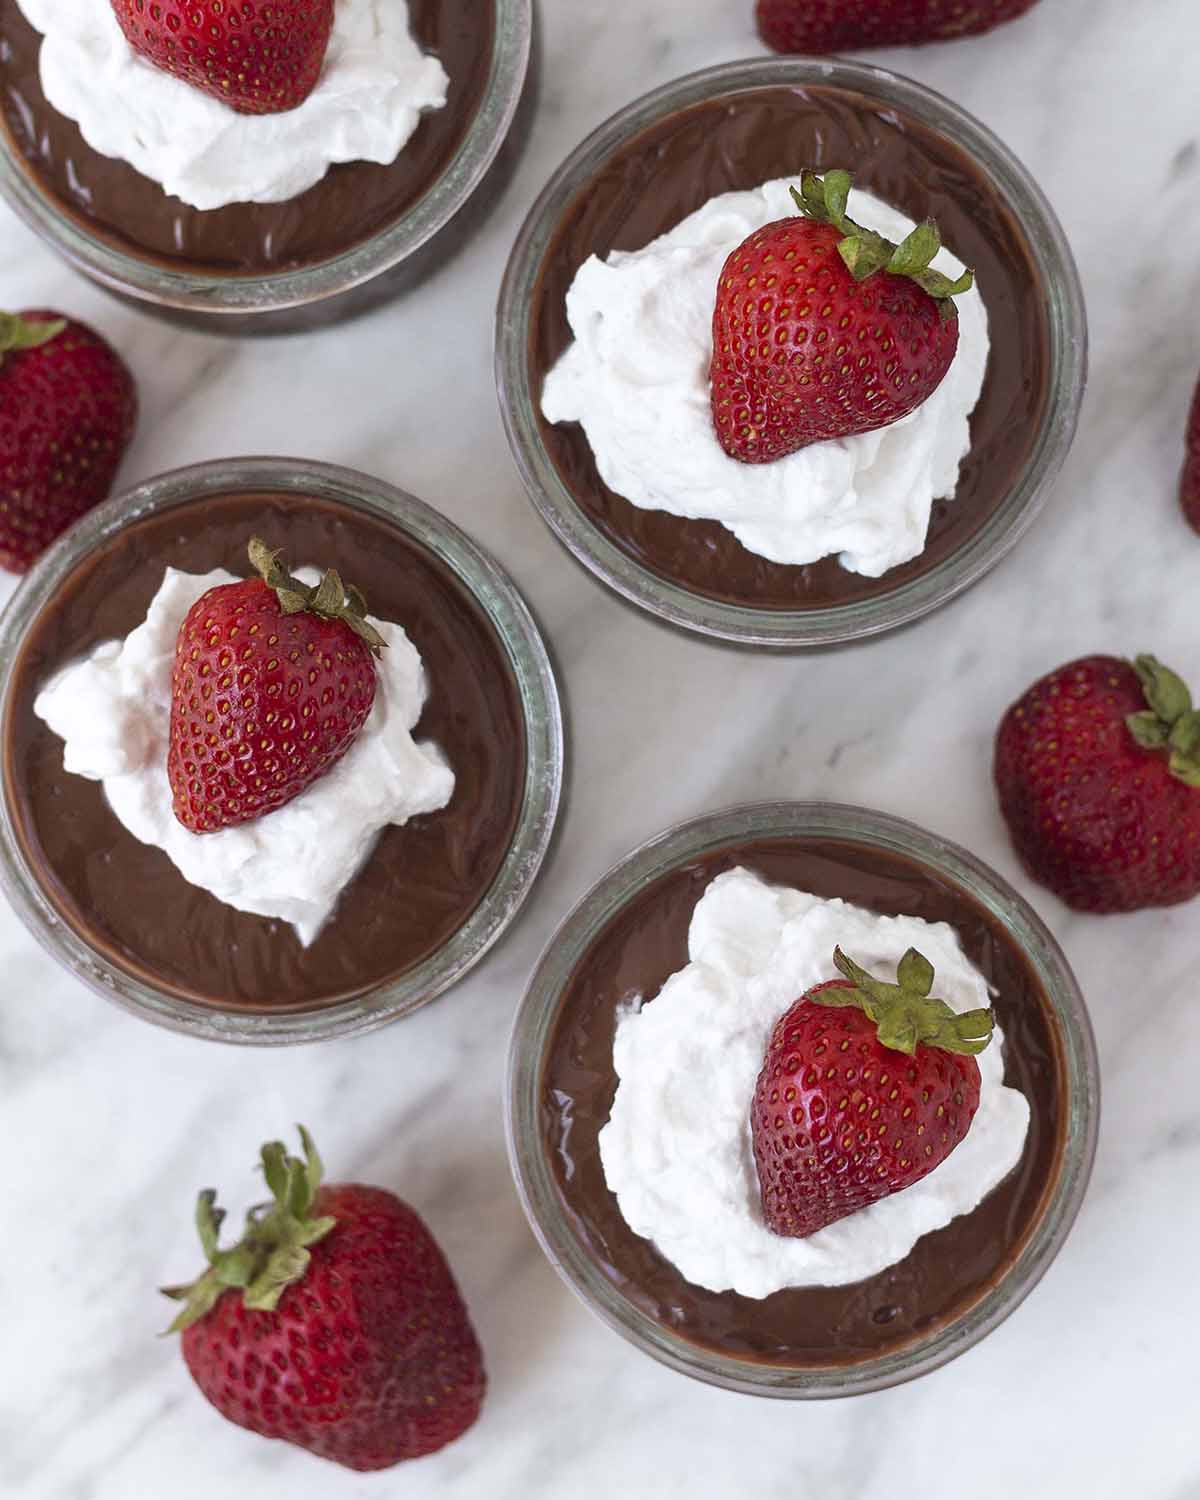 An overhead shot showing four bowls of dairy-free chocolate pudding on a table.